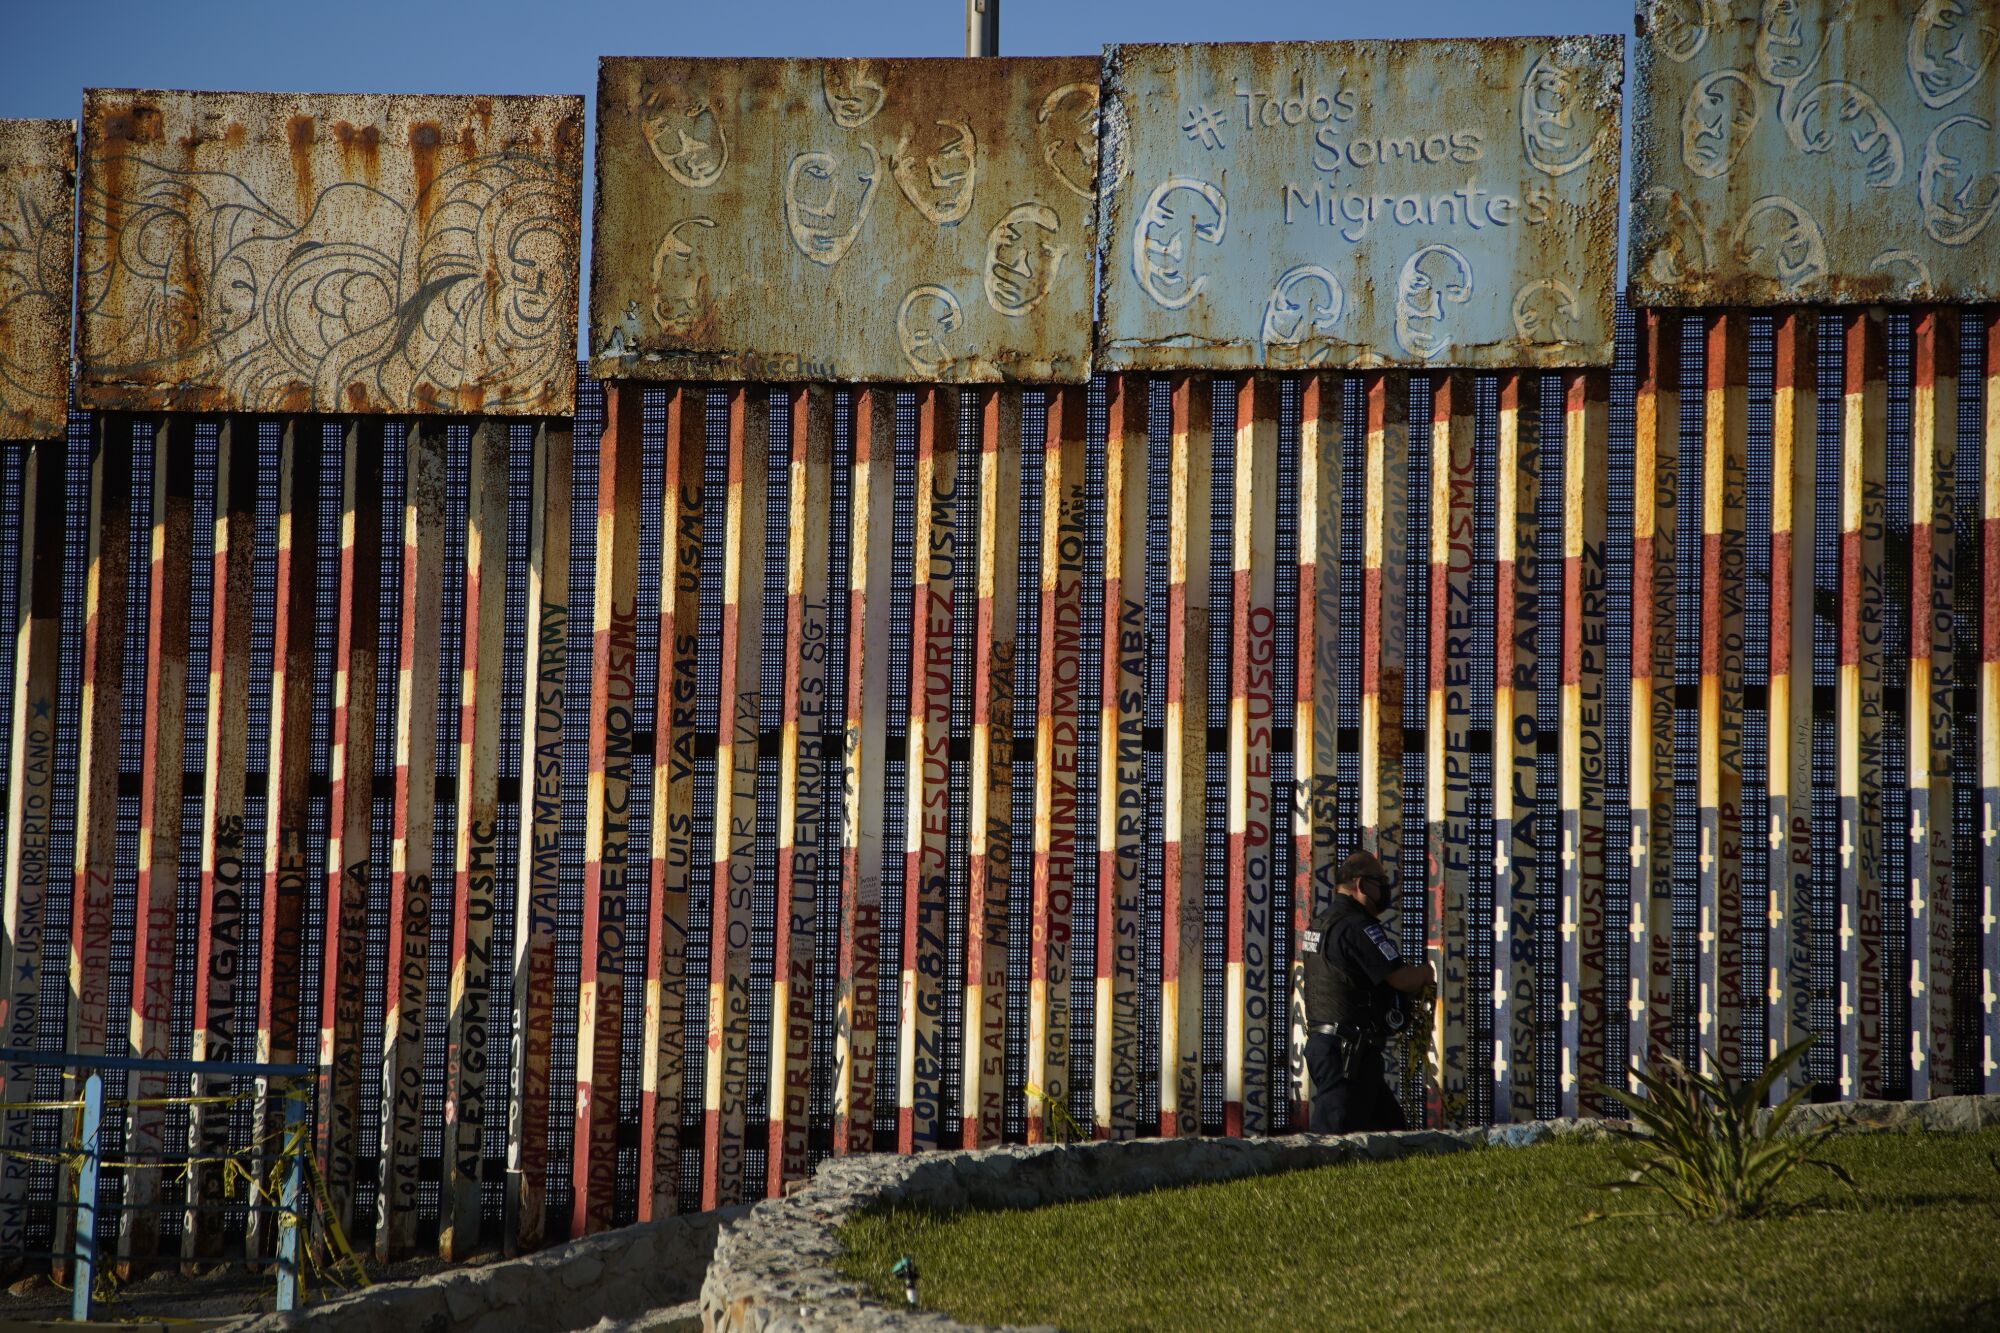 A Mexican police officer patrols near the graffiti-covered border fencing at Playas de Tijuana.